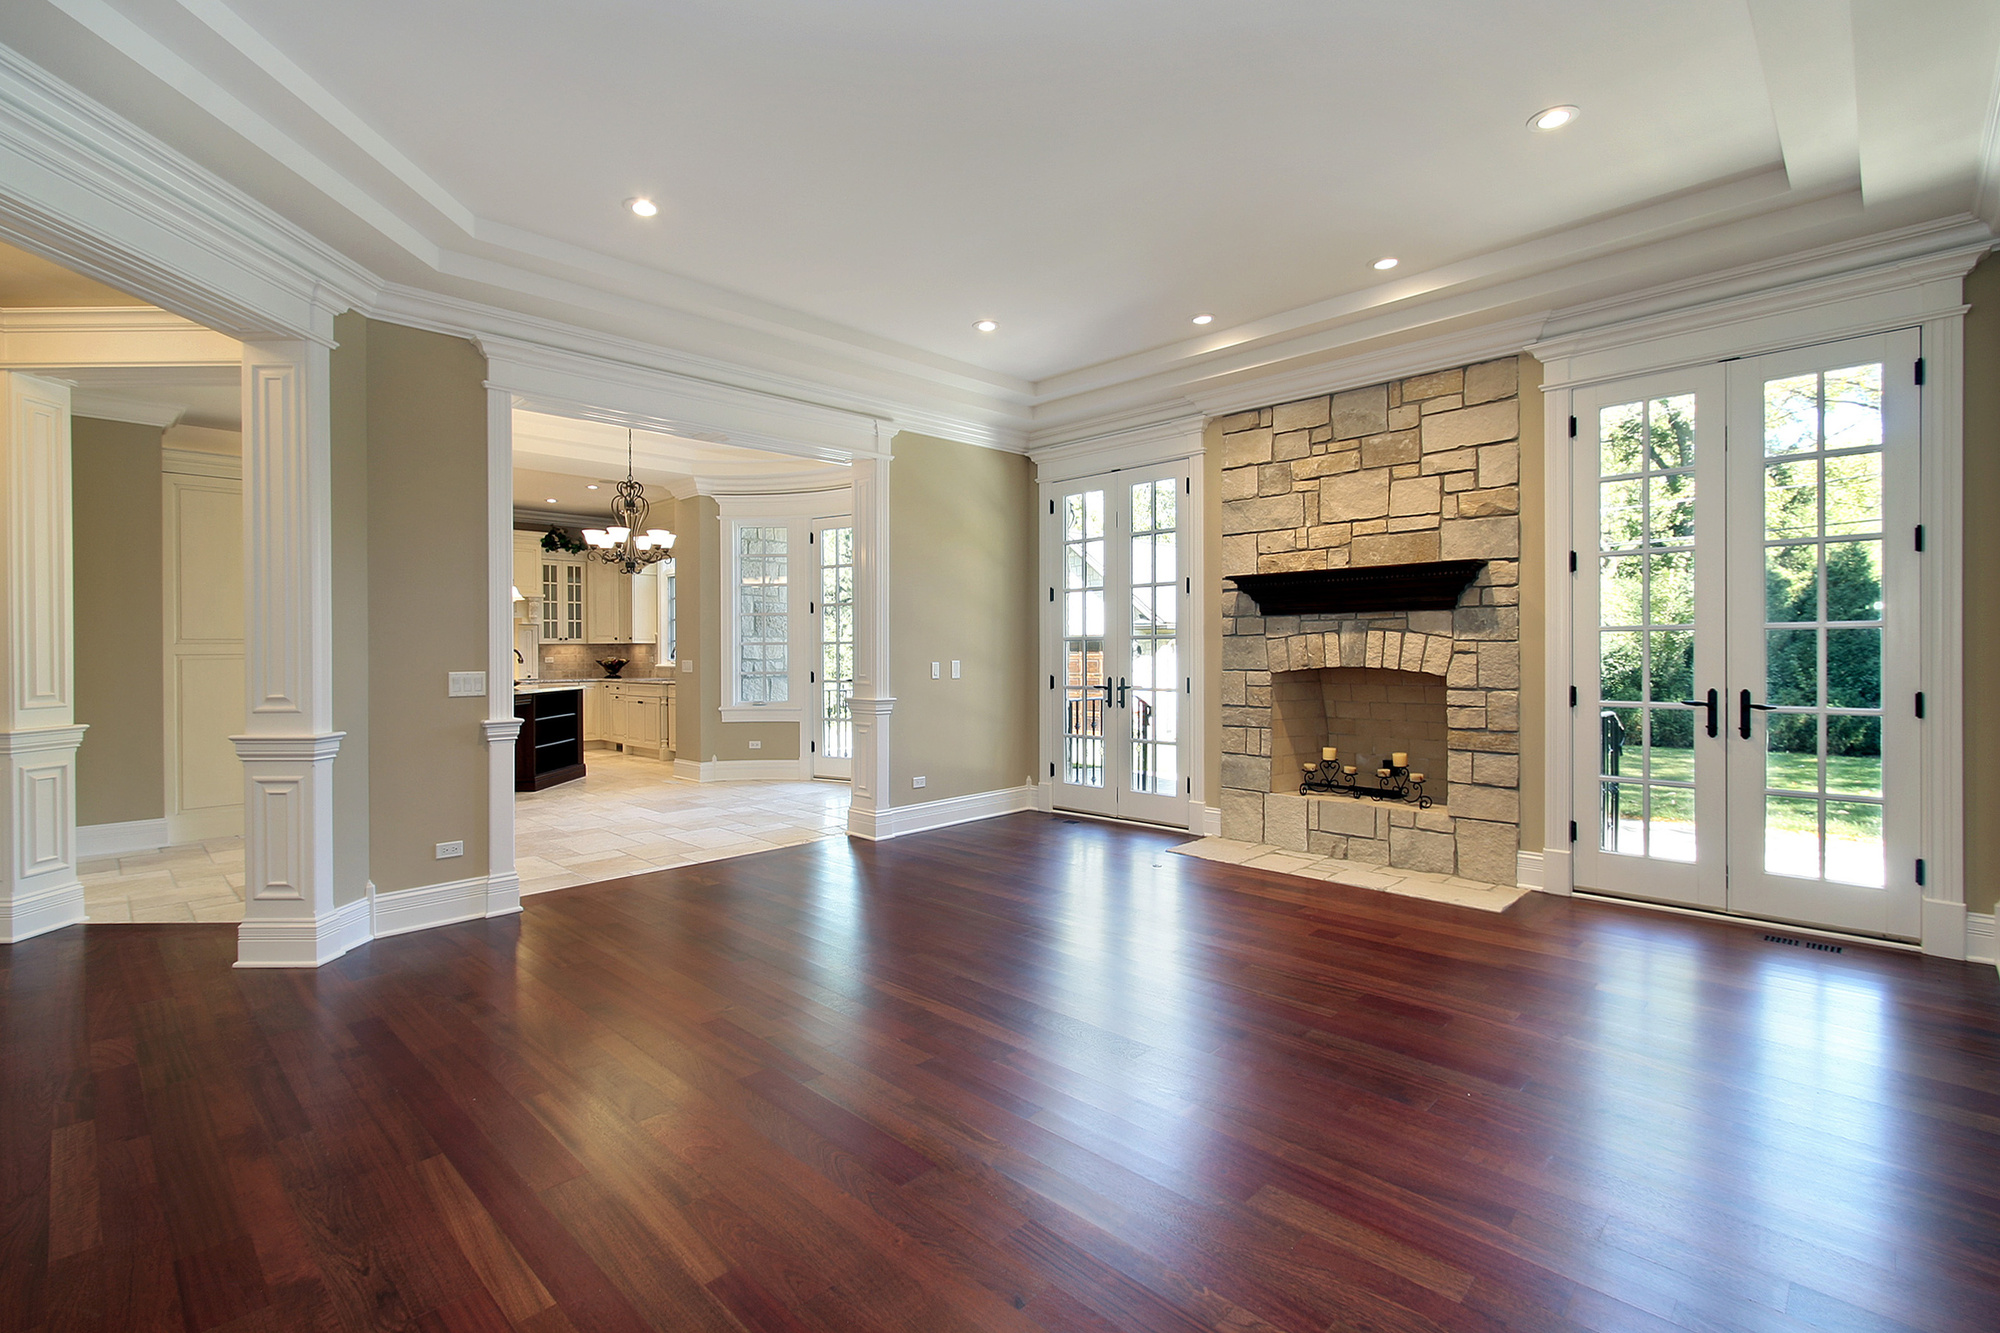 Are you wondering if wood flooring is right for your home? Click here for three factors you should consider before installing wood floors in your home.